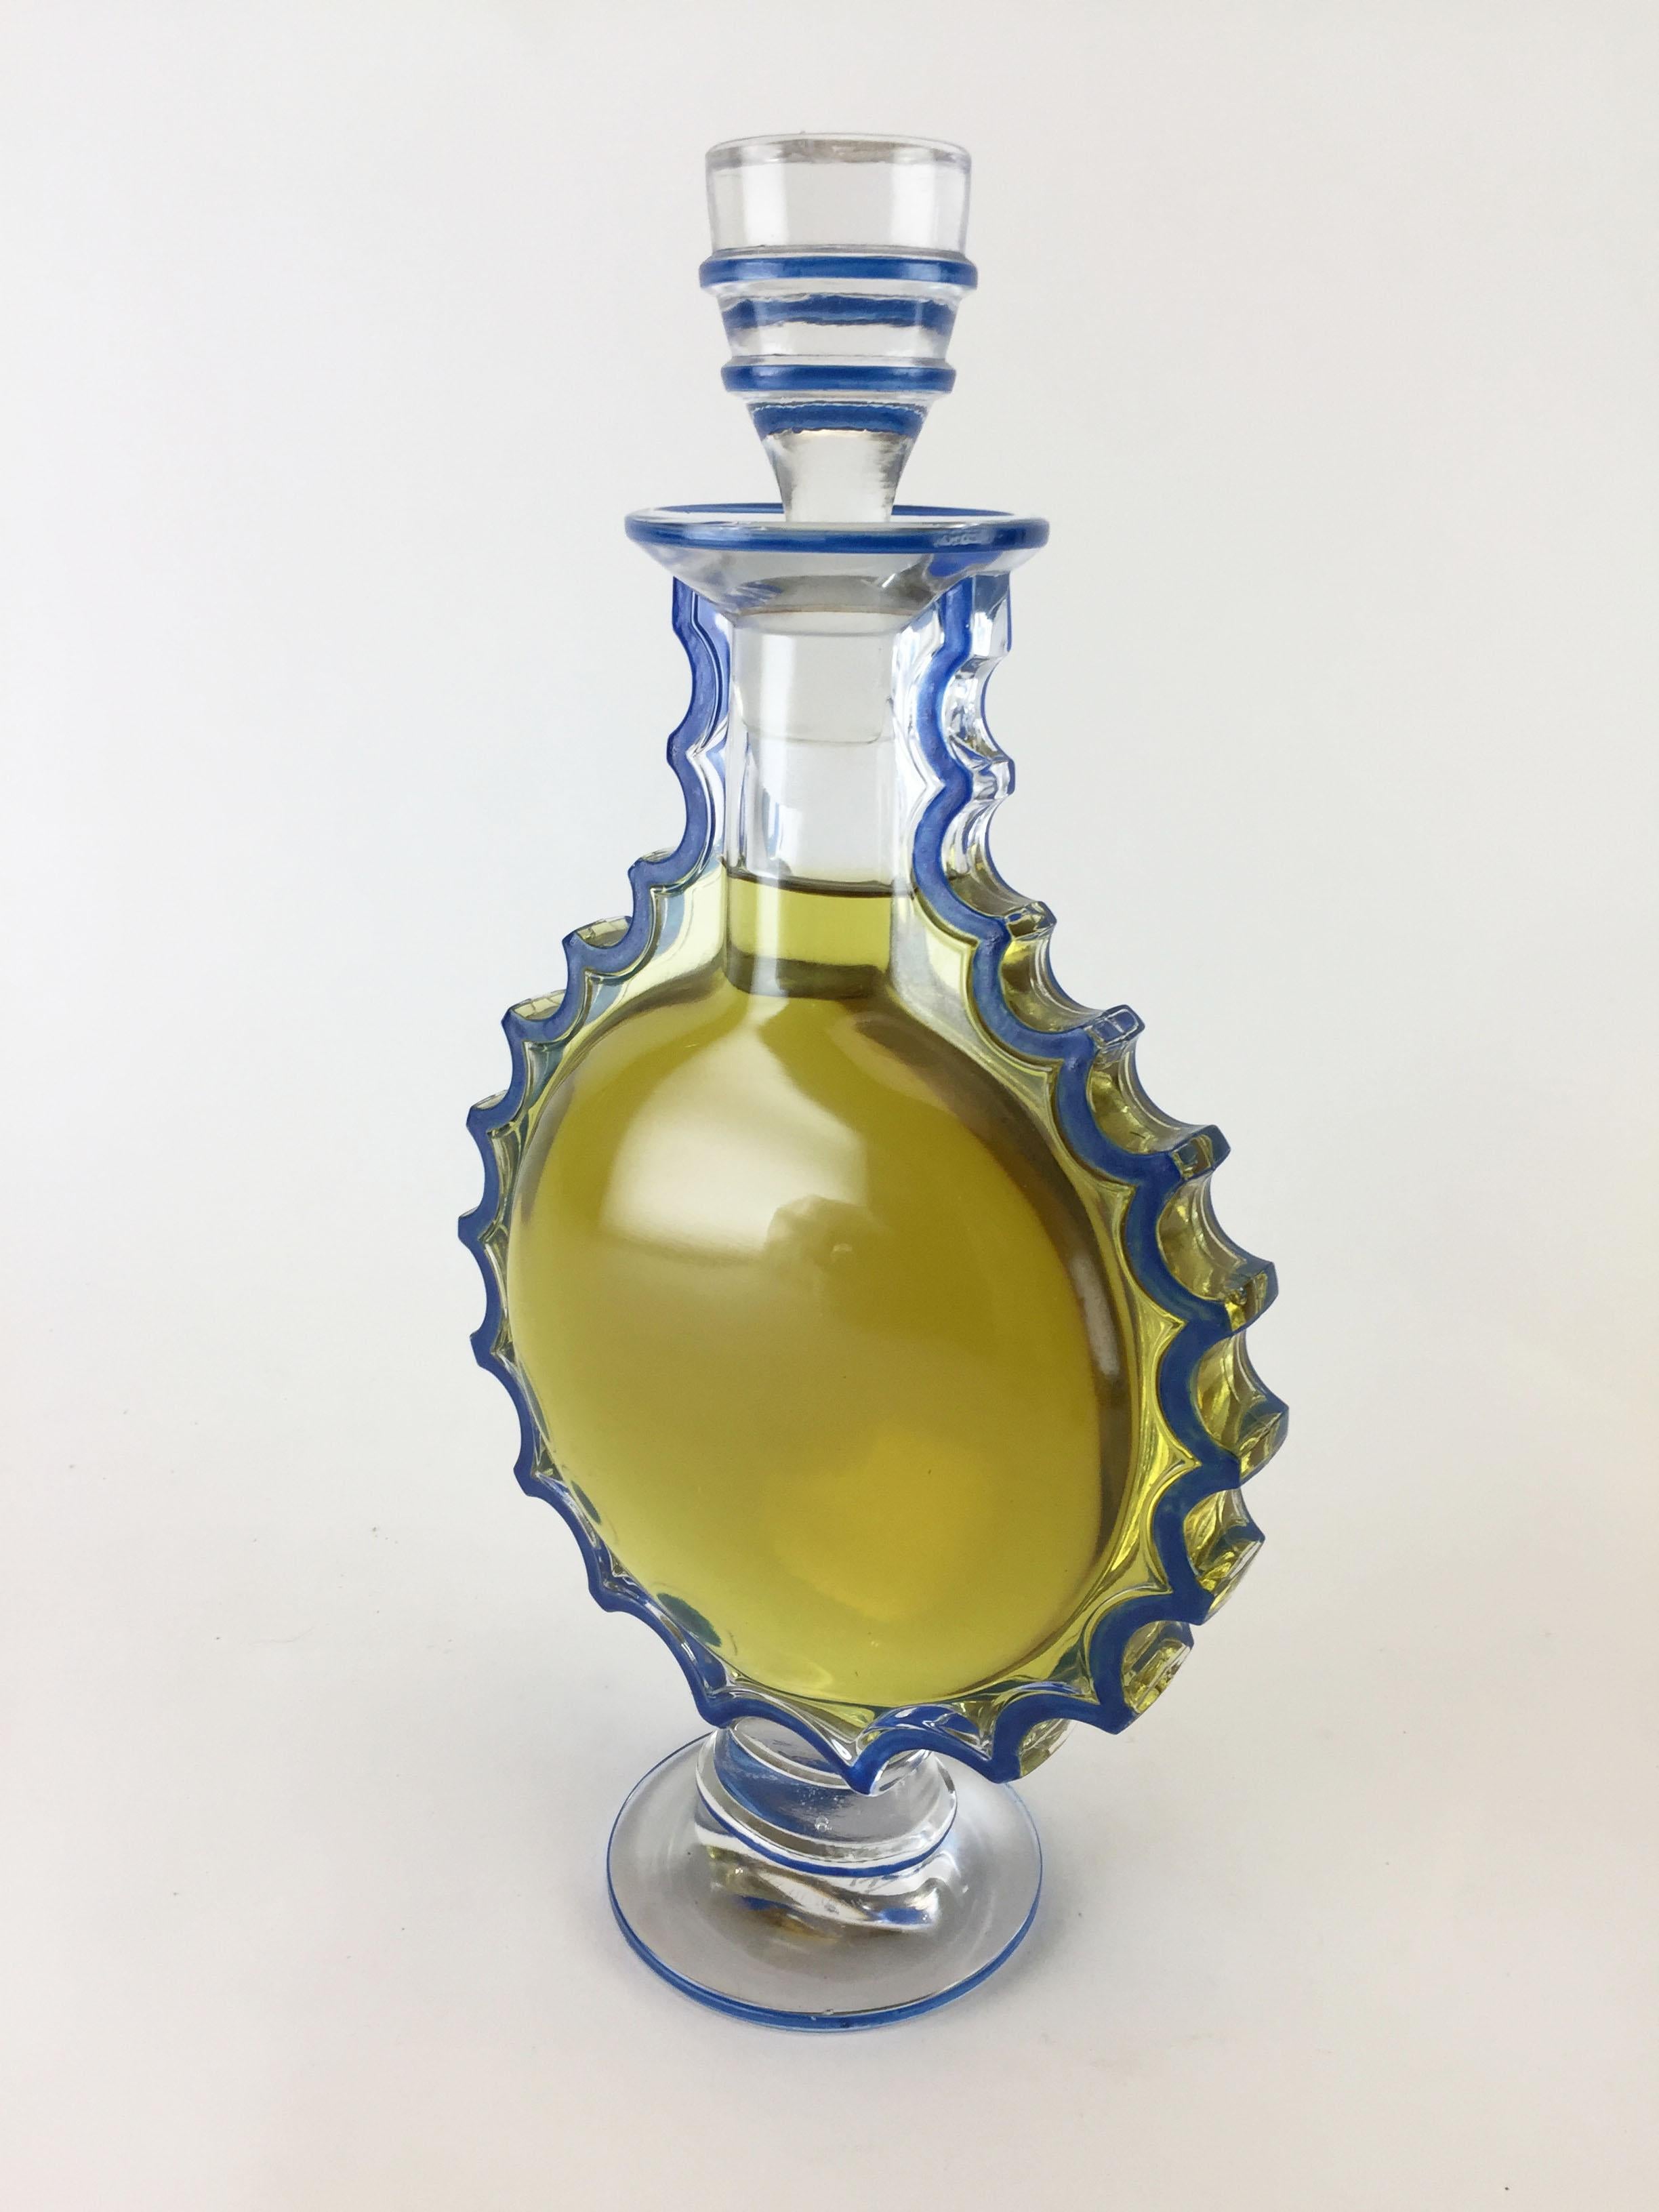 A rare Art Deco crystal and enamel perfume bottle designed by Marc Lalique (son of Rene Lalique) for the Worth Perfume Company’s “Requete” fragrance. This is the rarely seen large master size display bottle (factice), at nearly 11” tall (27.5 cm), 5